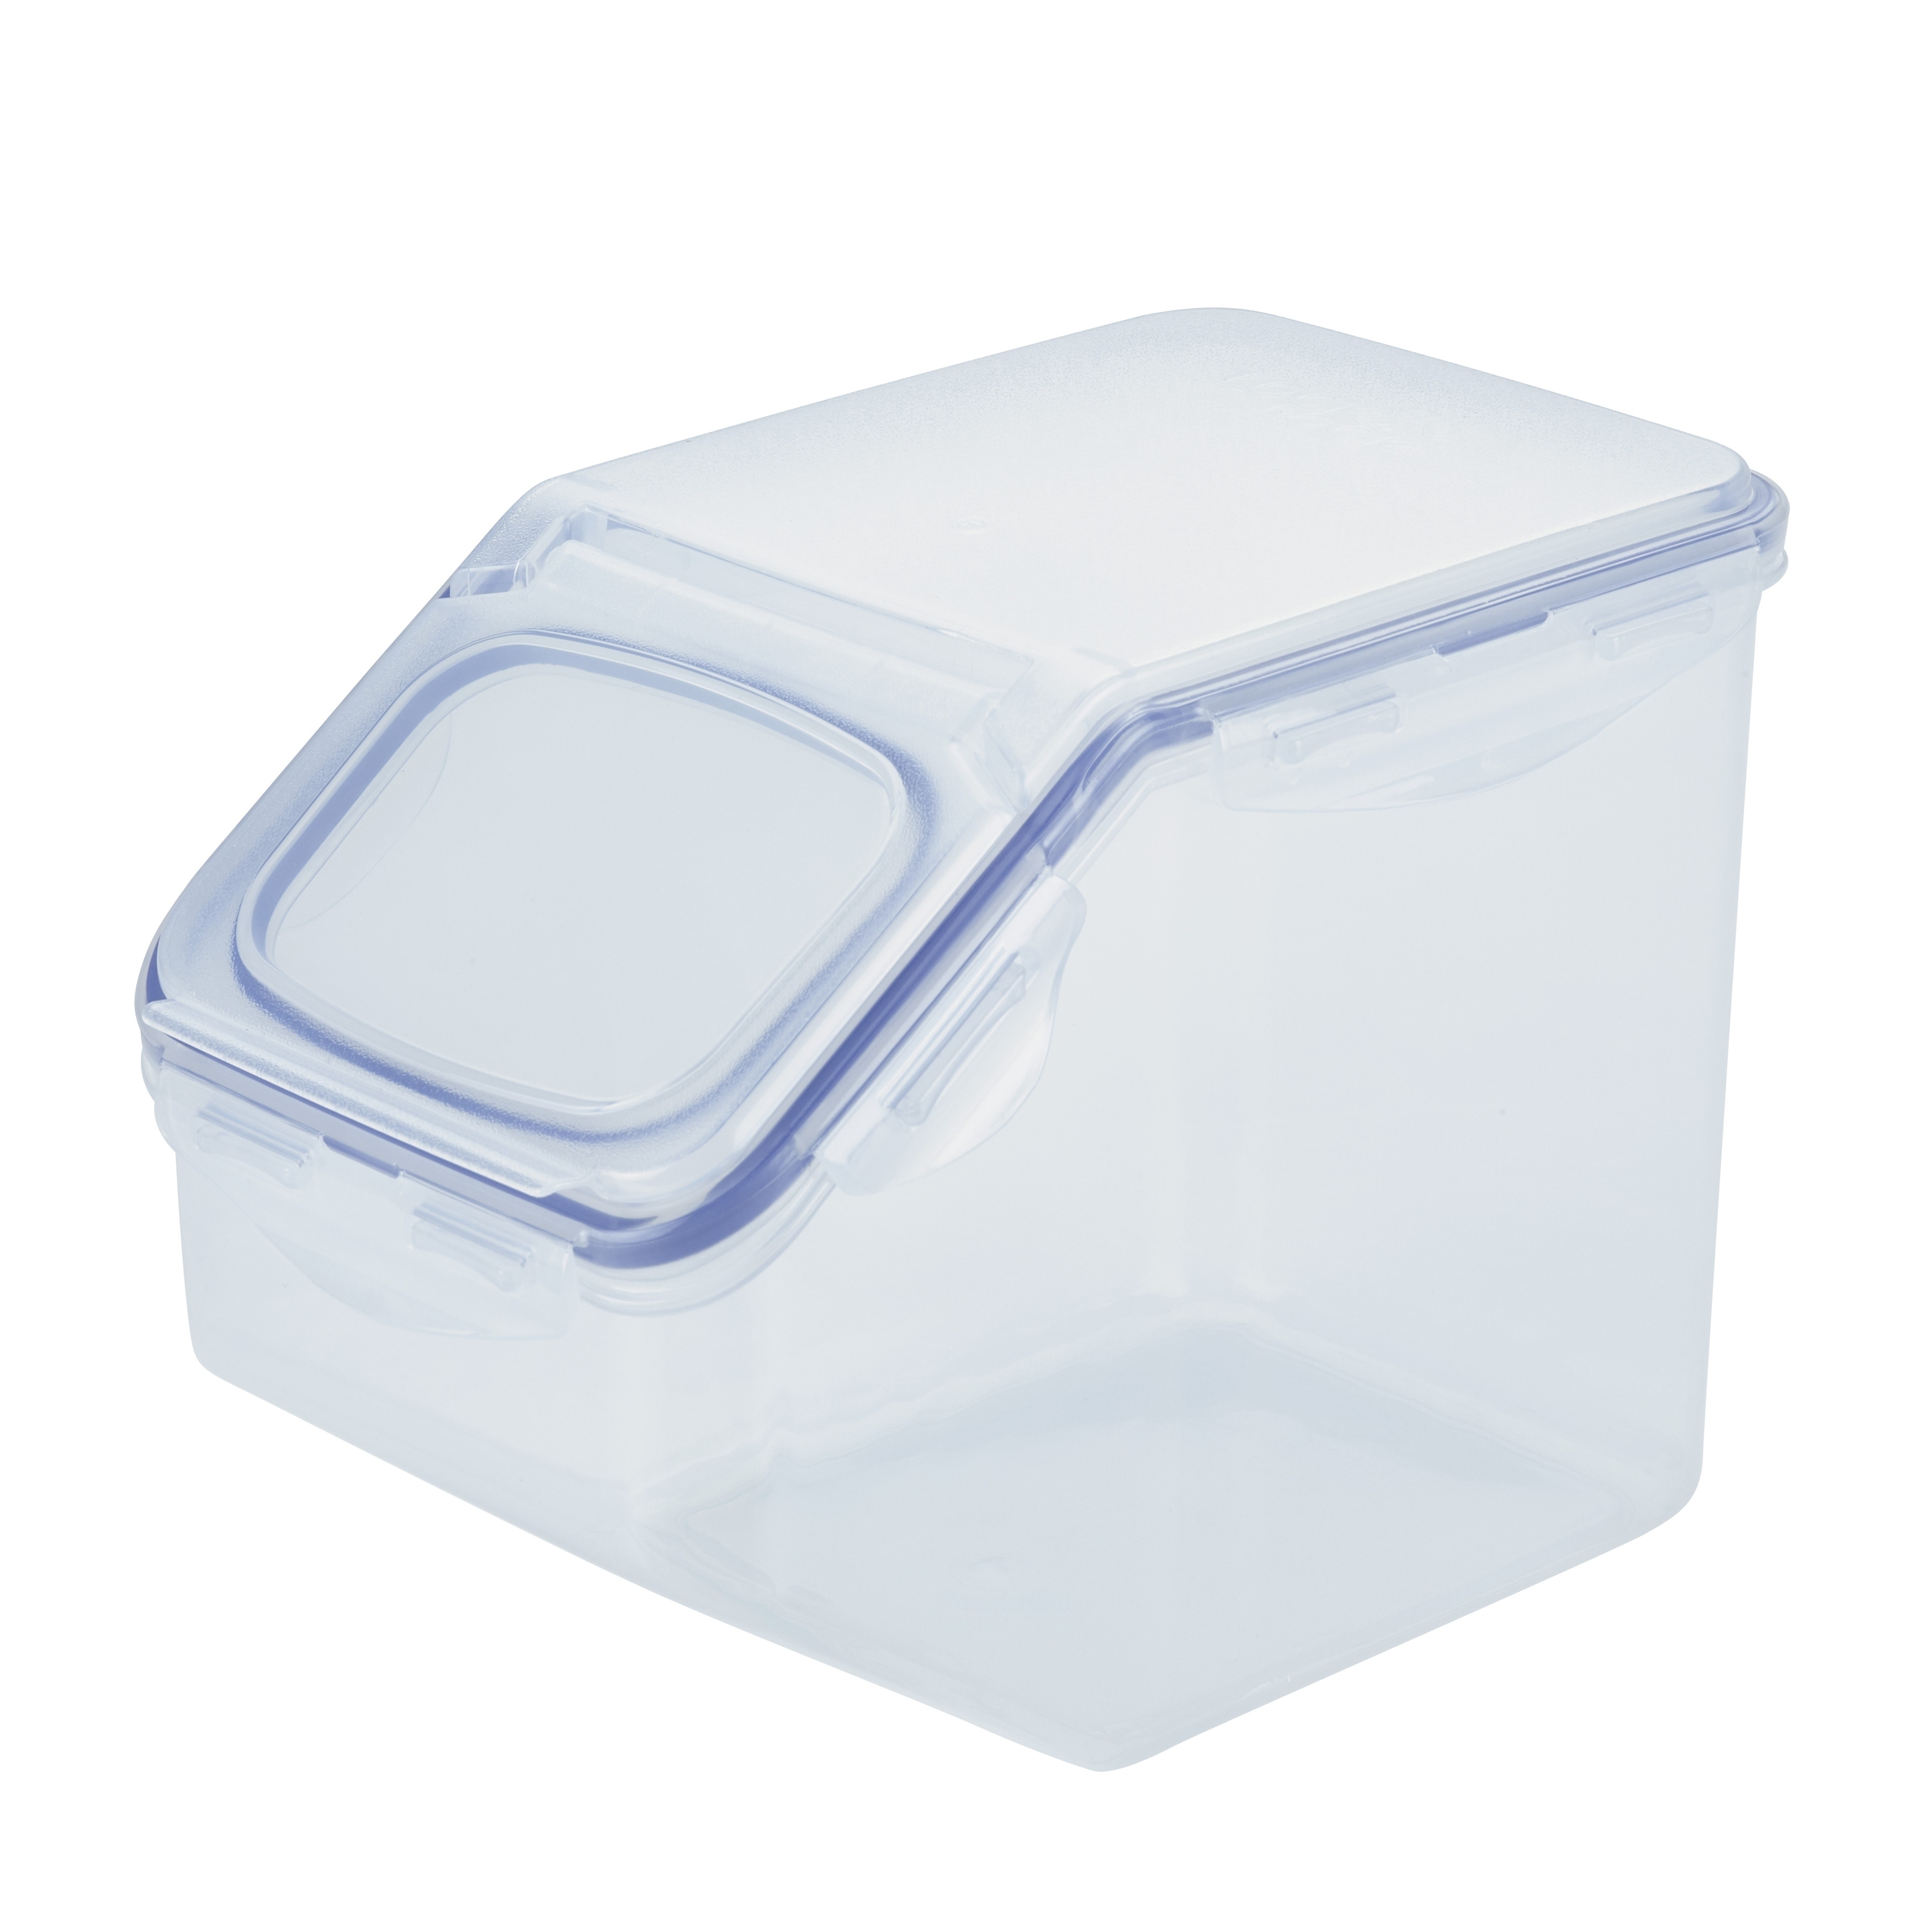 https://ak1.ostkcdn.com/images/products/29013430/Easy-Essentials-Pantry-Rectangular-Food-Storage-Container-with-Lid-2c2dcff7-889b-4484-89e8-3999cf5eeb2d.jpg